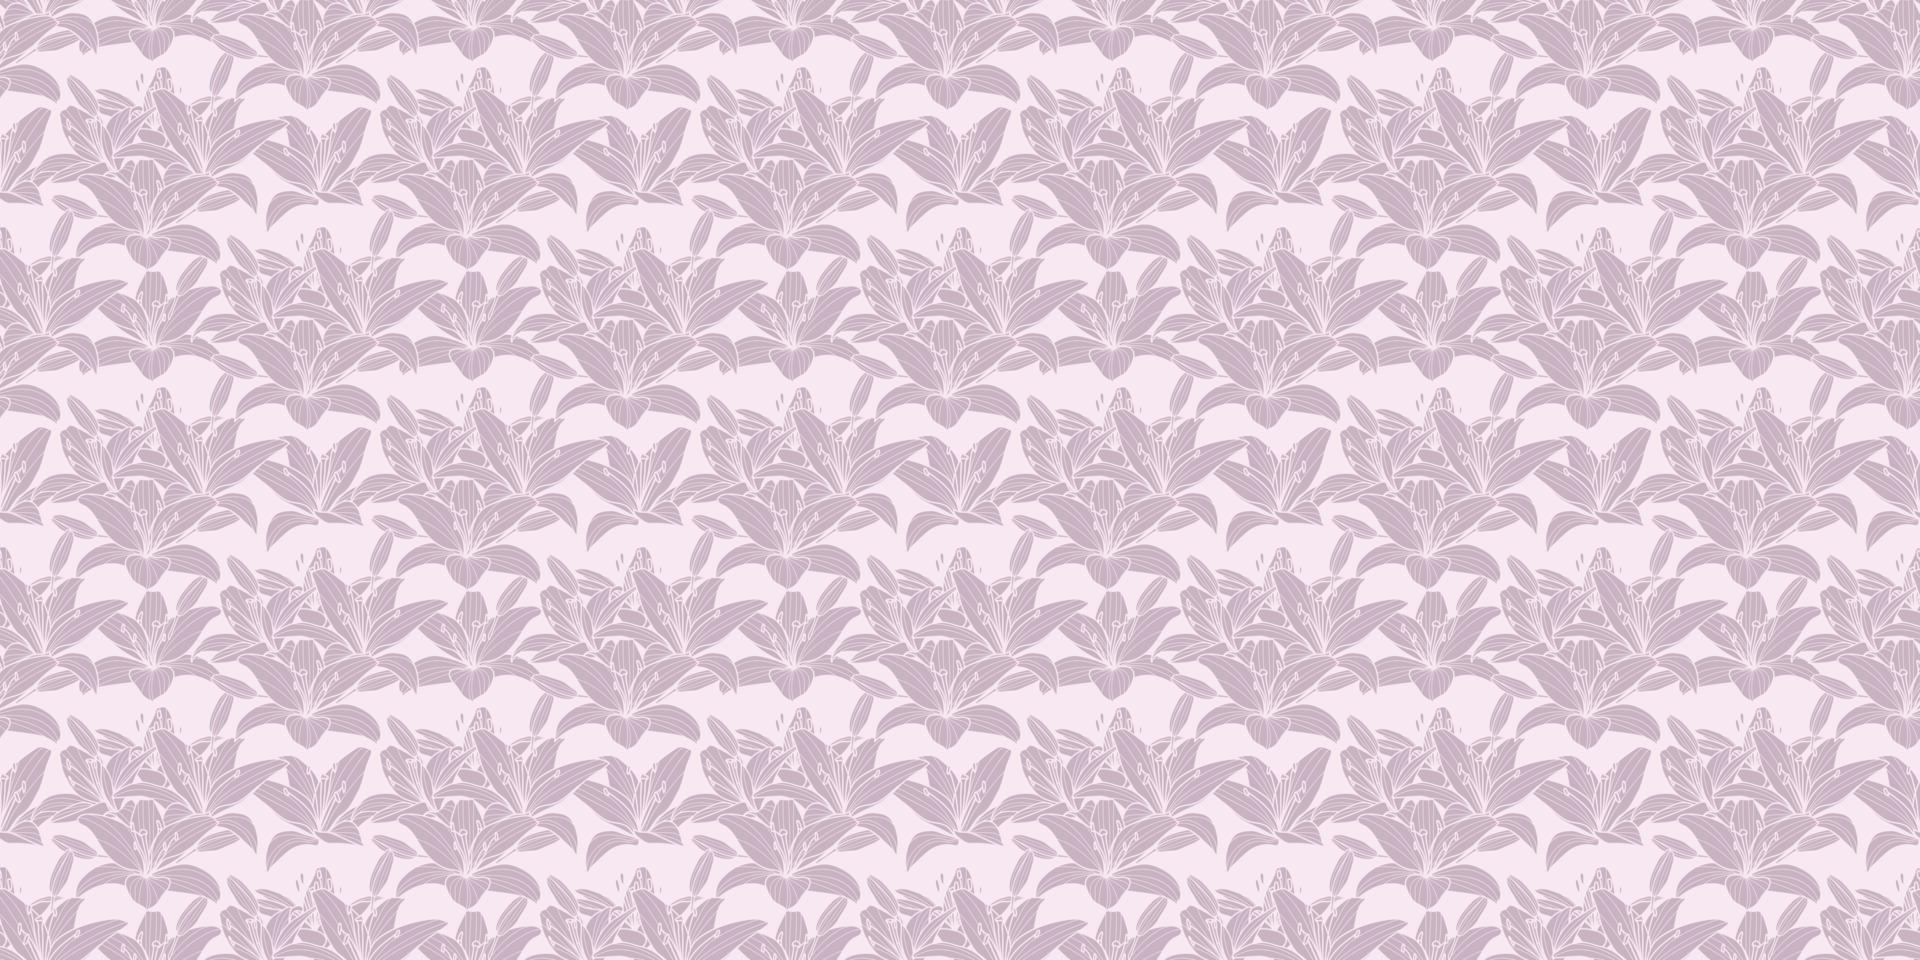 Pastel lilies seamless repeat pattern vector background